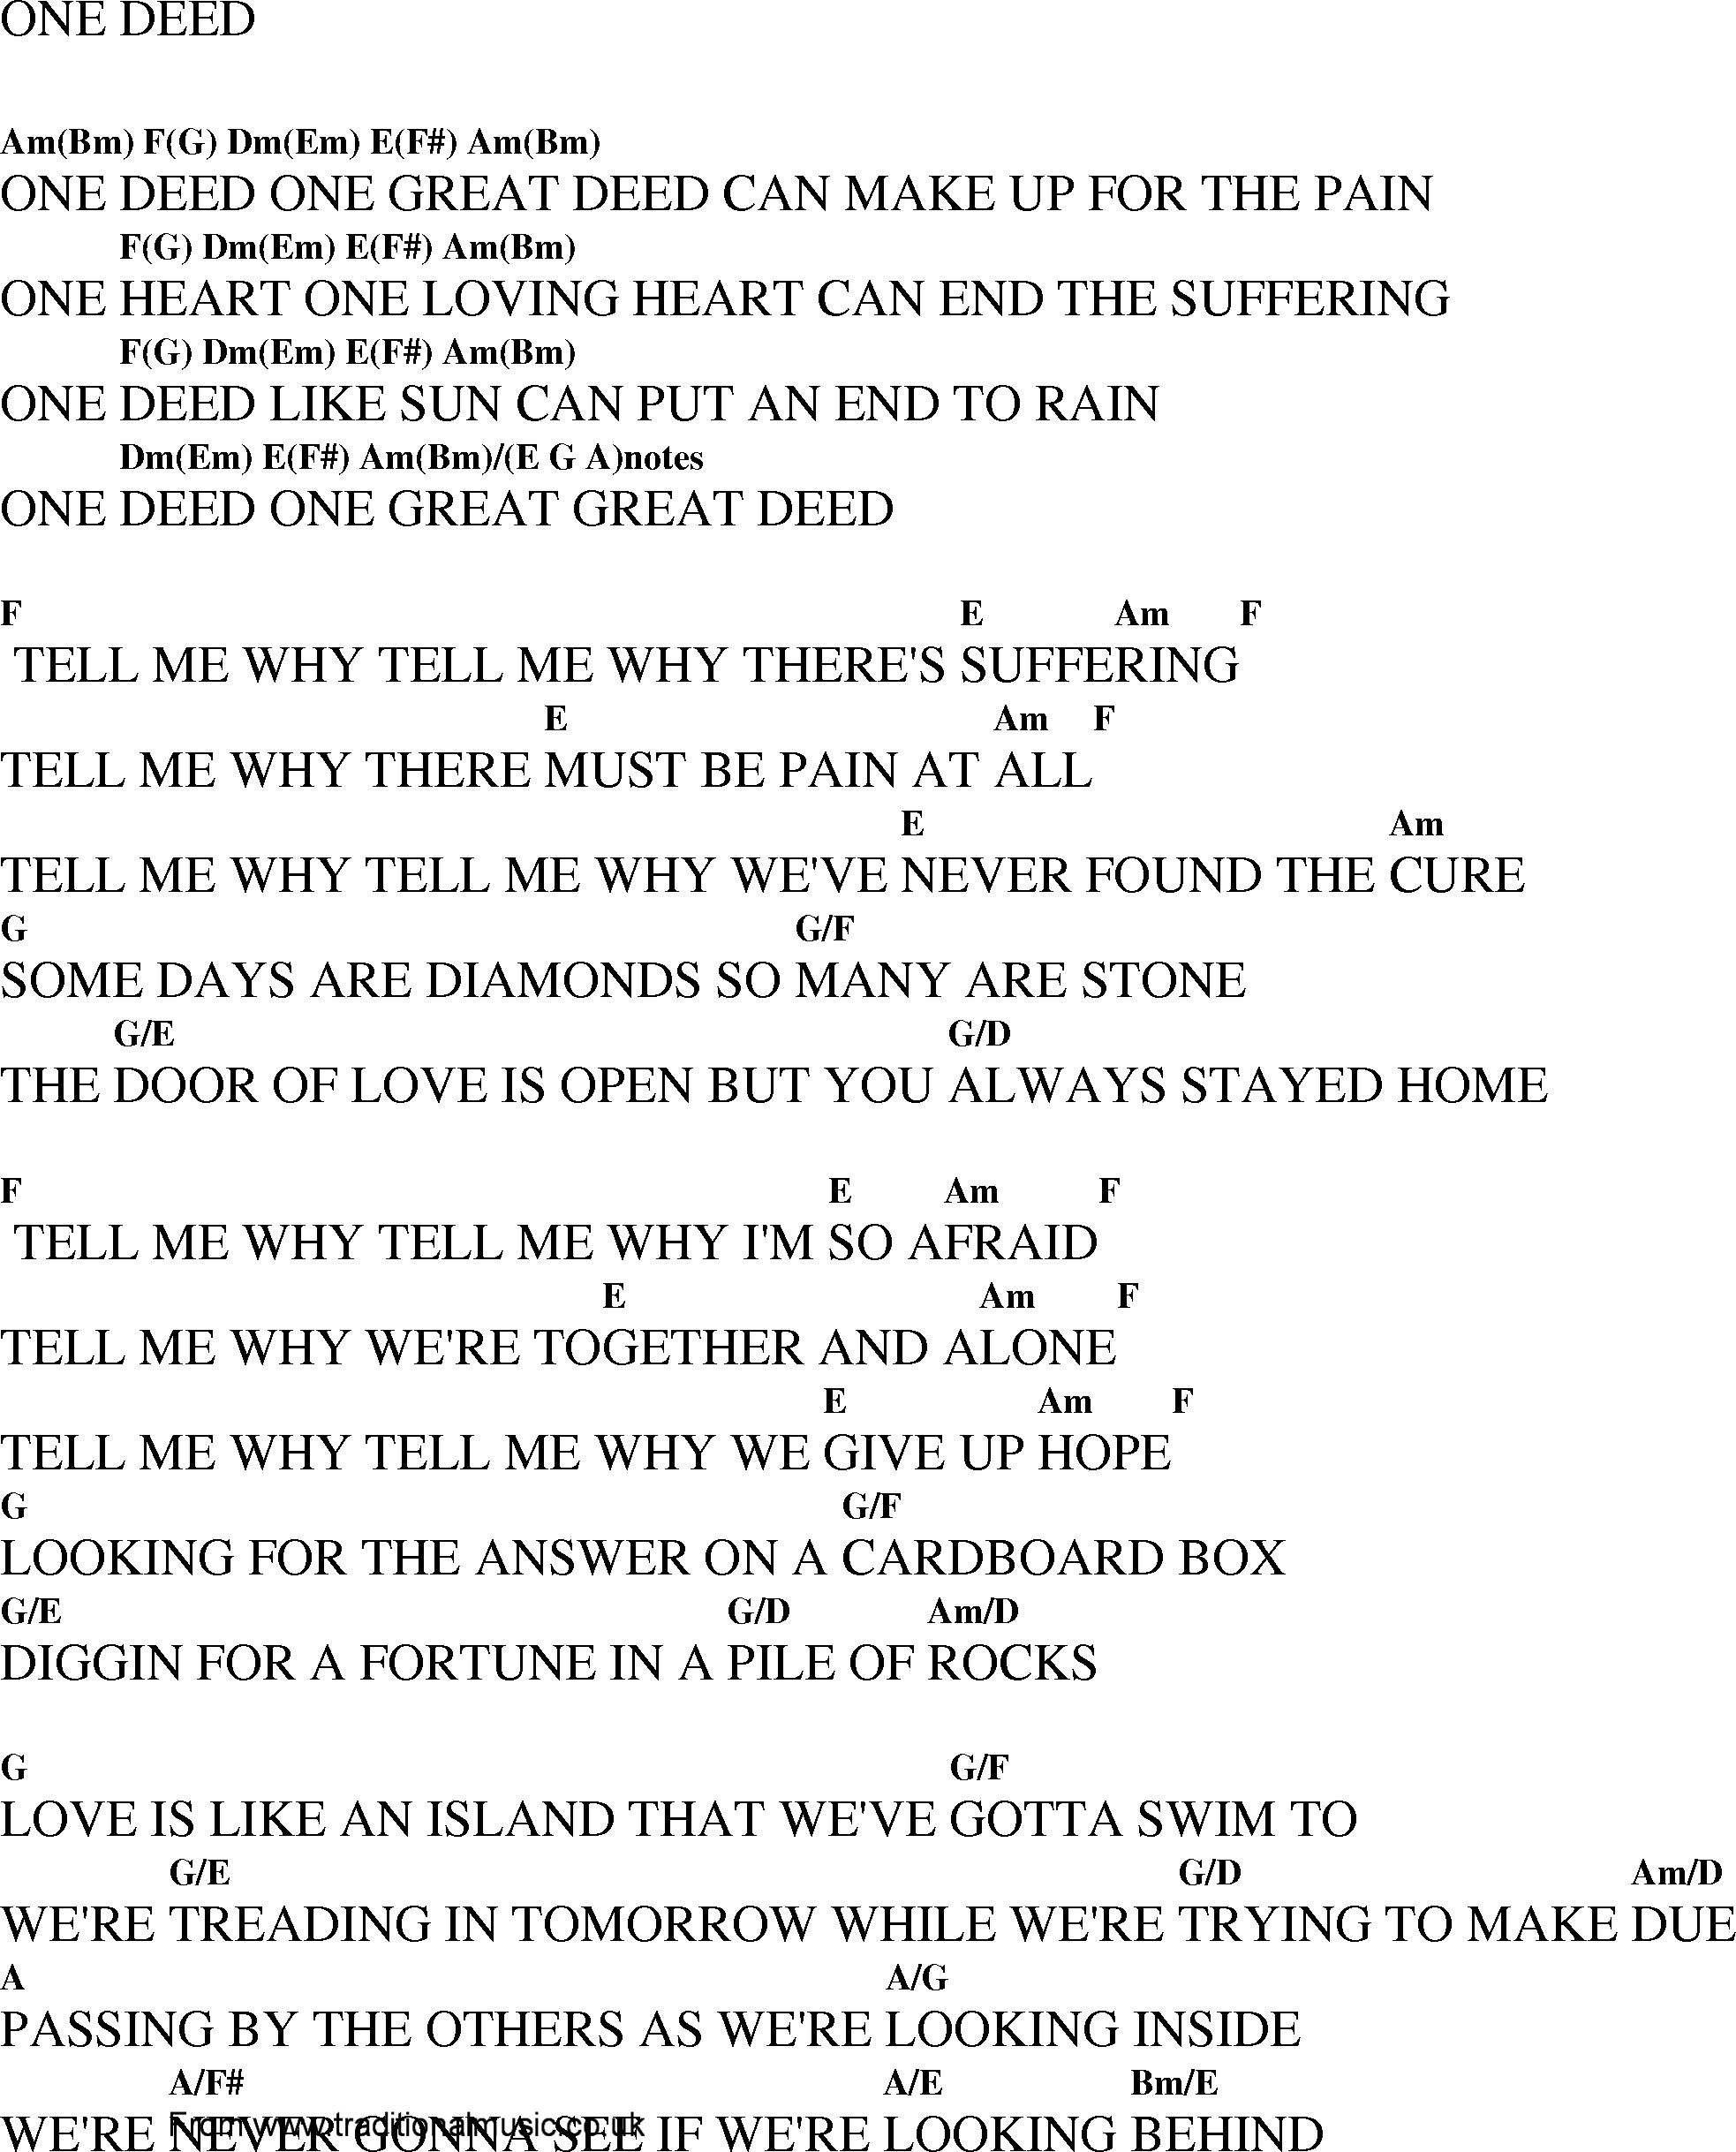 Gospel Song: one_deed, lyrics and chords.